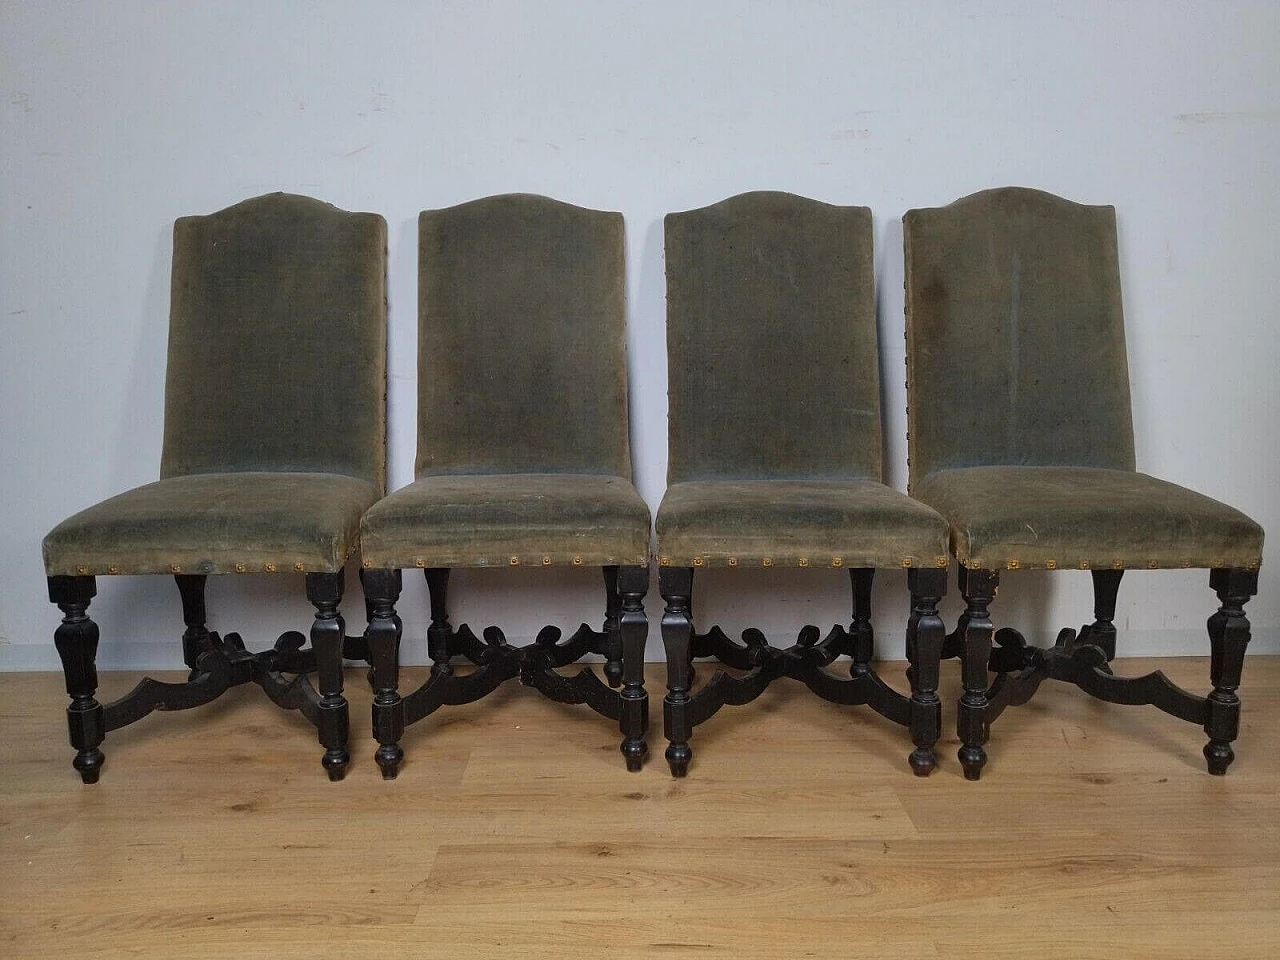 4 Rocchetto chairs in ebonised wood, 18th century 2